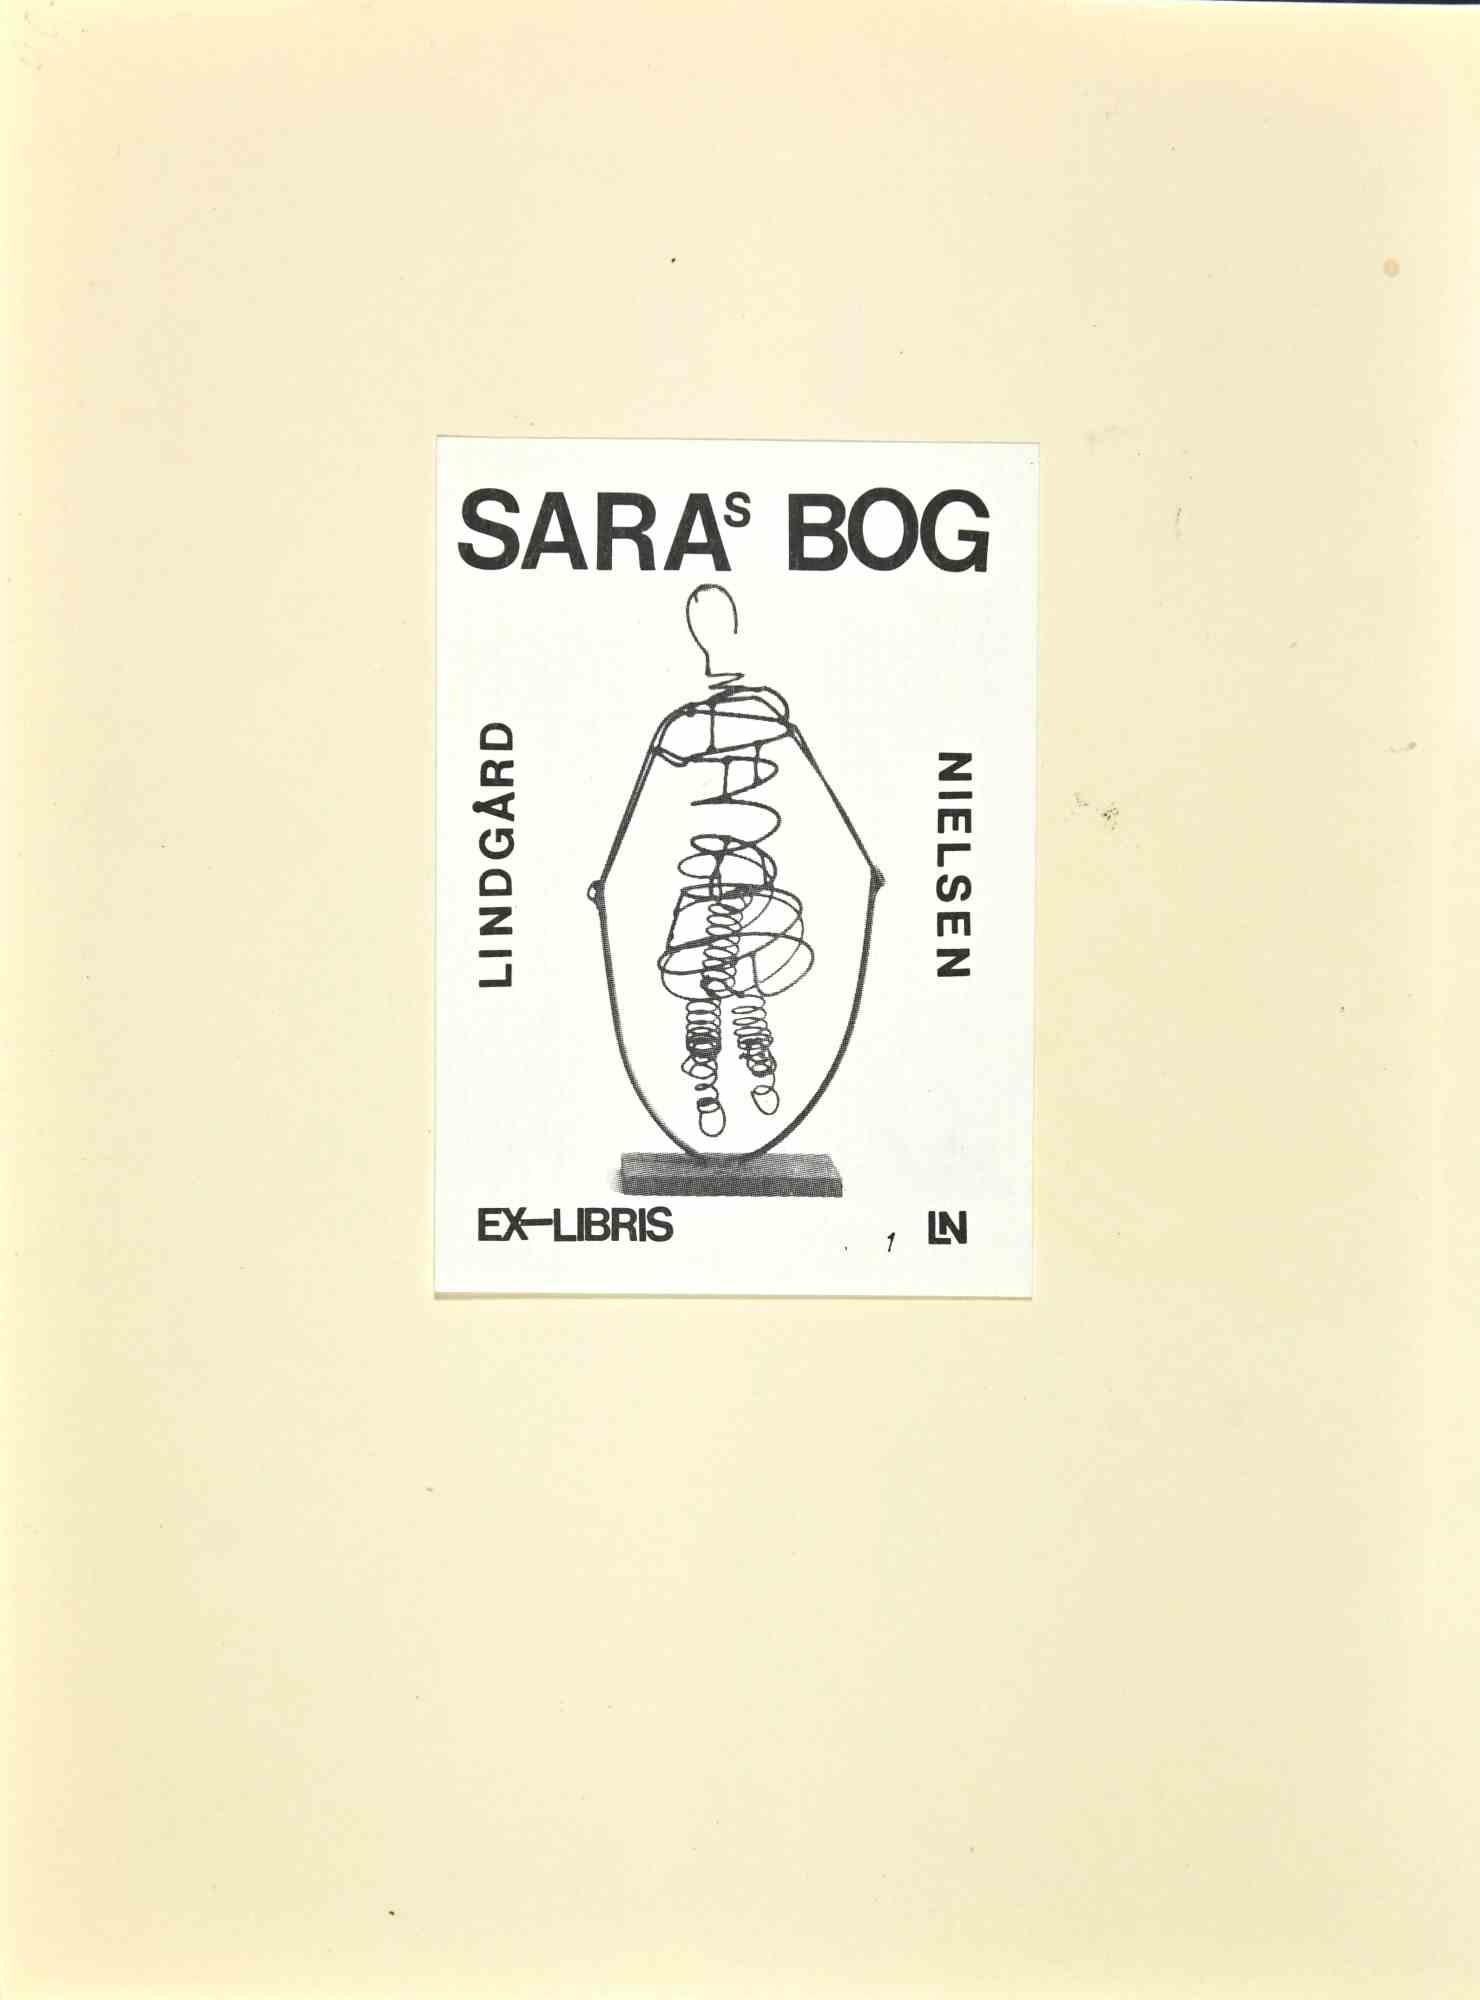  Ex Libris   - Sara Bog is a Modern Artwork realized in Mid 20th Century, by Leif Nielsen, from Denmark.

Ex Libris. B/W woodcut on paper.  Hand signed on the back. 

The work is glued on ivory cardboard.

Total dimensions: 20x 15 cm.

Good